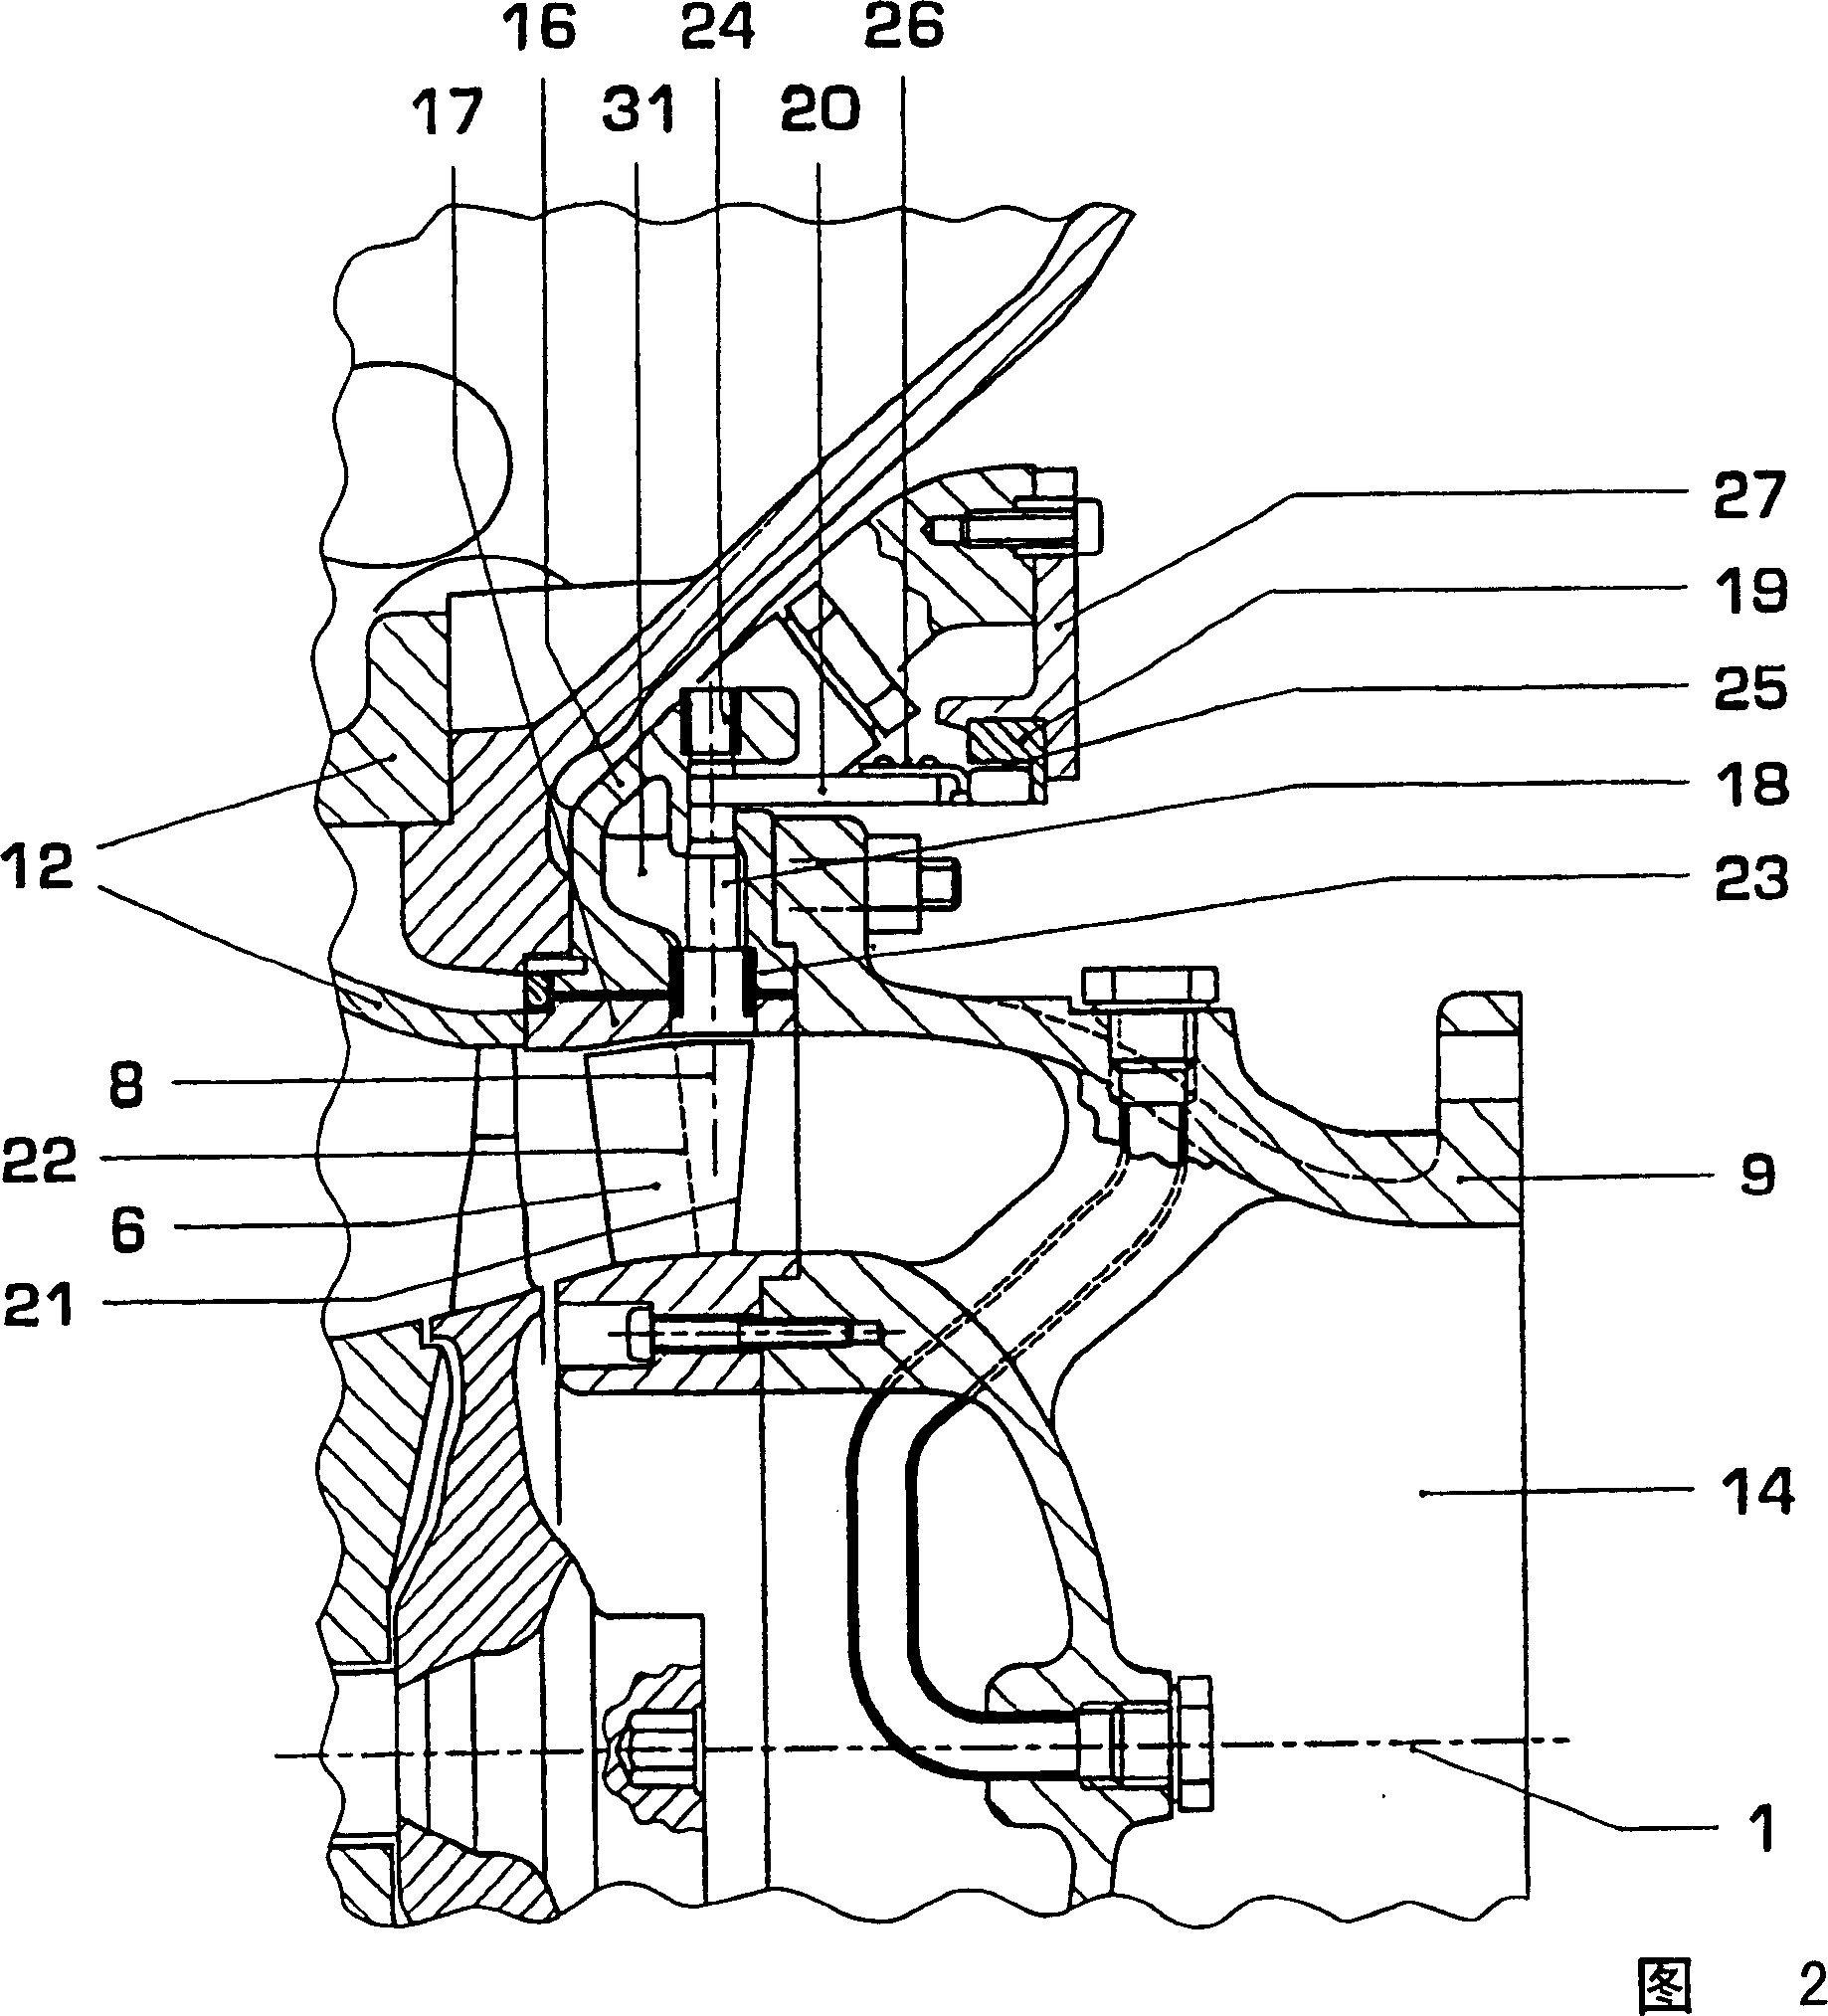 Distributor for exhaust gas turbine with axial flow